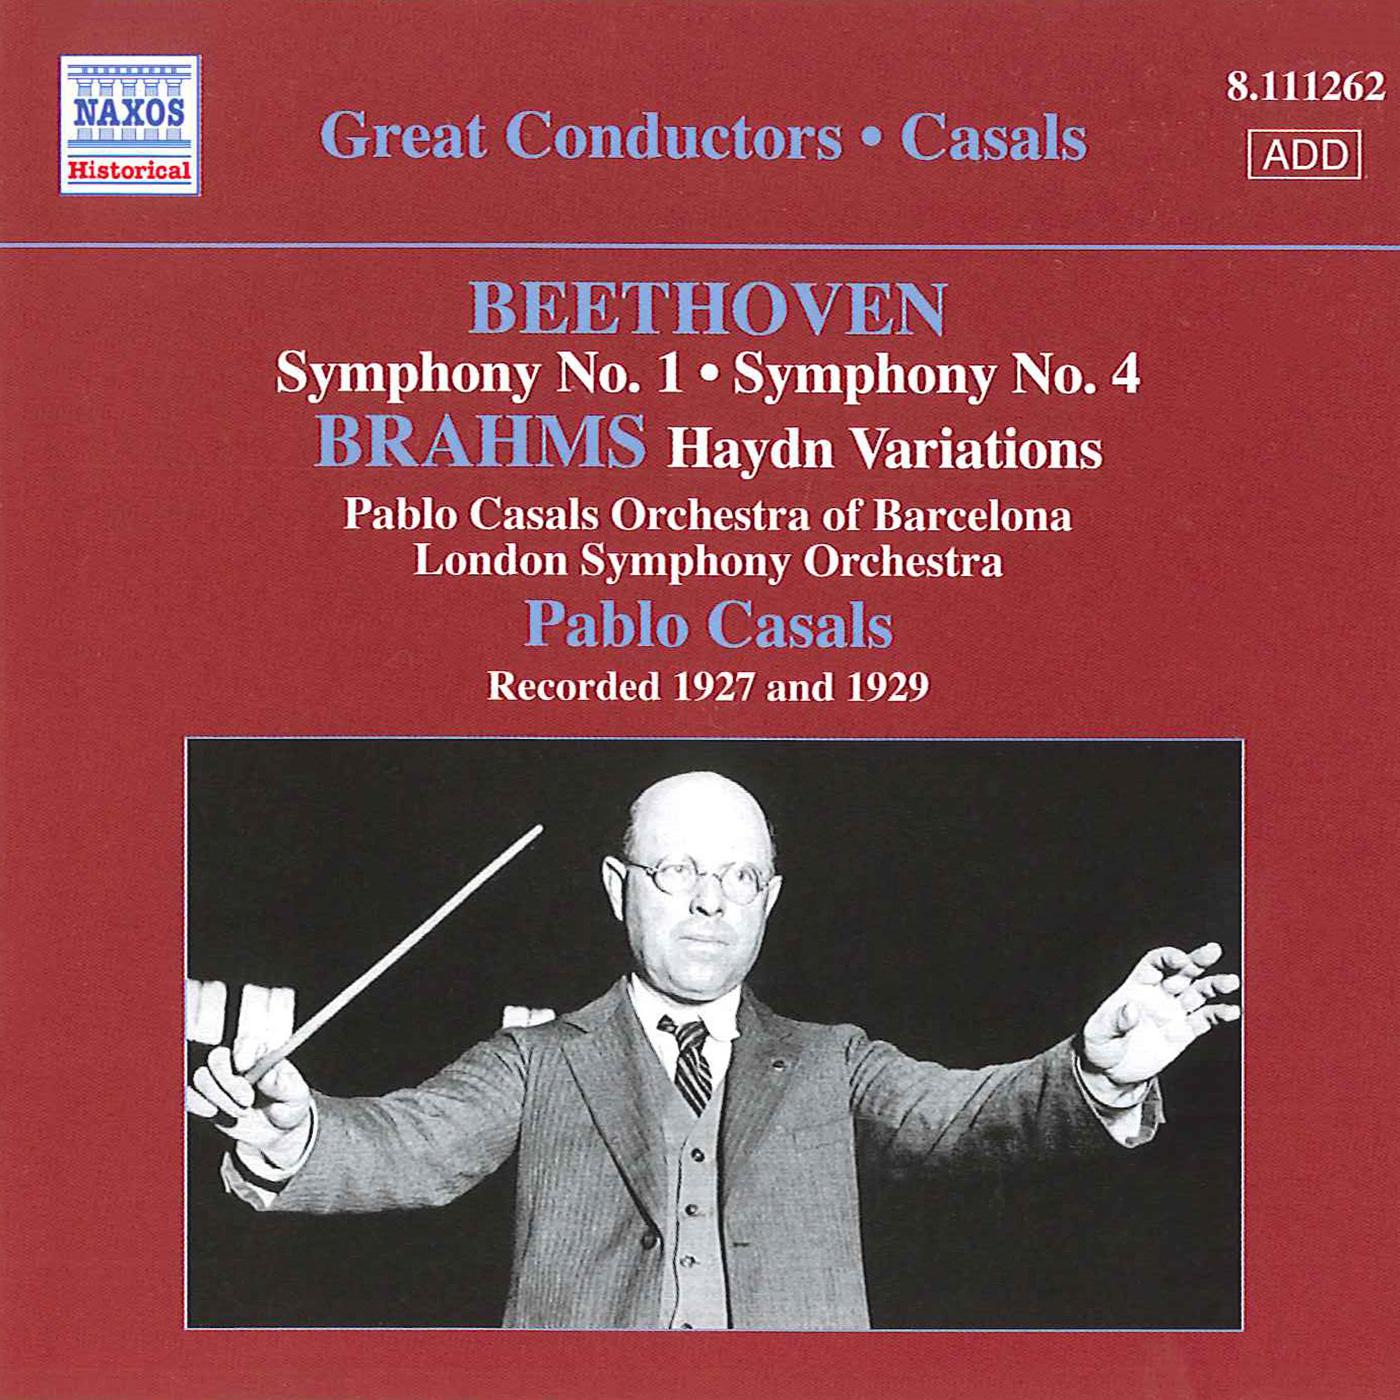 Variations on a Theme by Haydn, Op. 56a, "St. Anthony Variations": Variation 4: Andante con moto